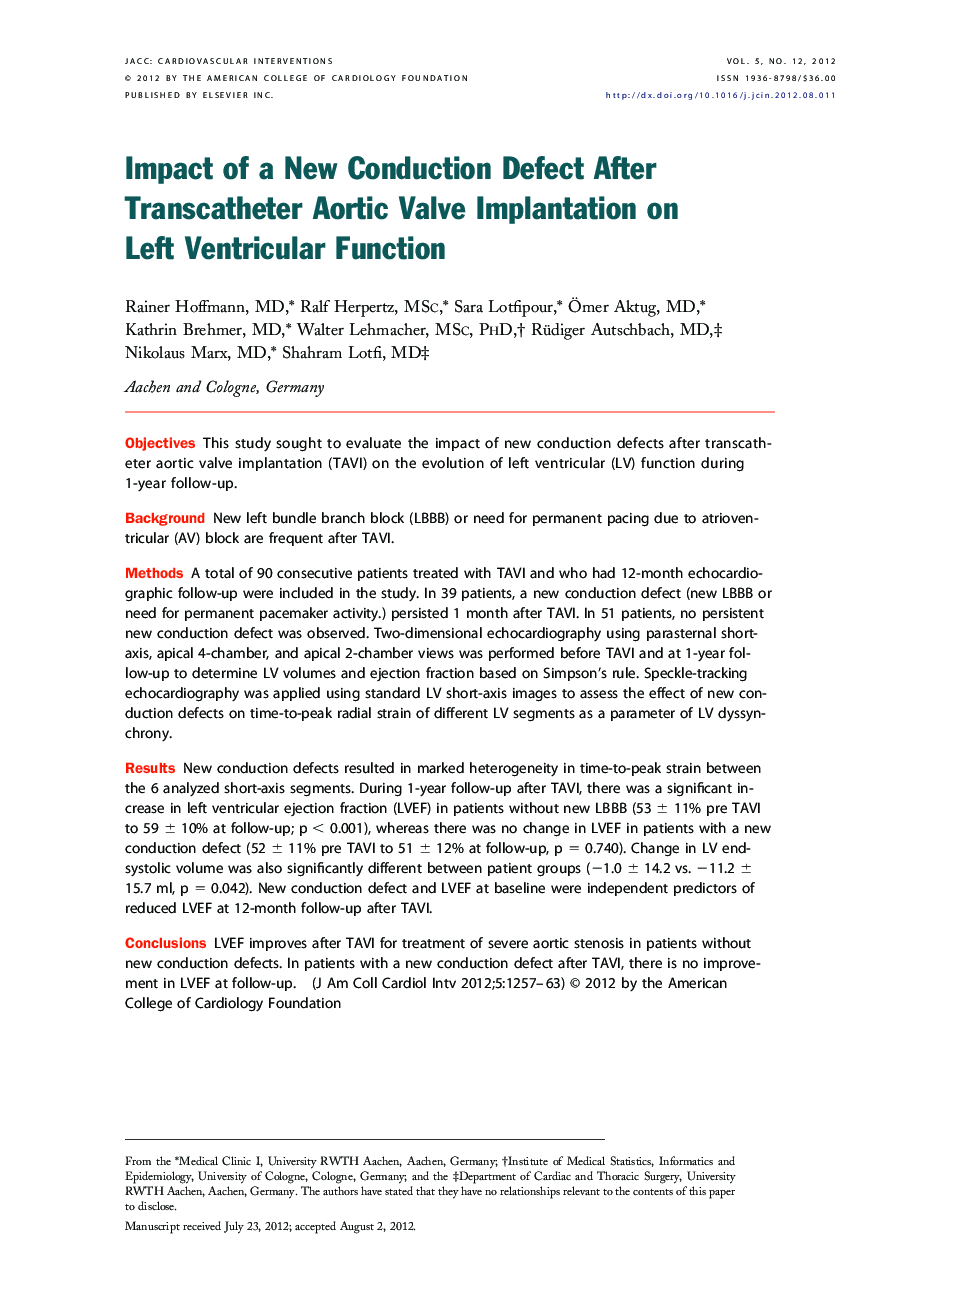 Impact of a New Conduction Defect After Transcatheter Aortic Valve Implantation on Left Ventricular Function 